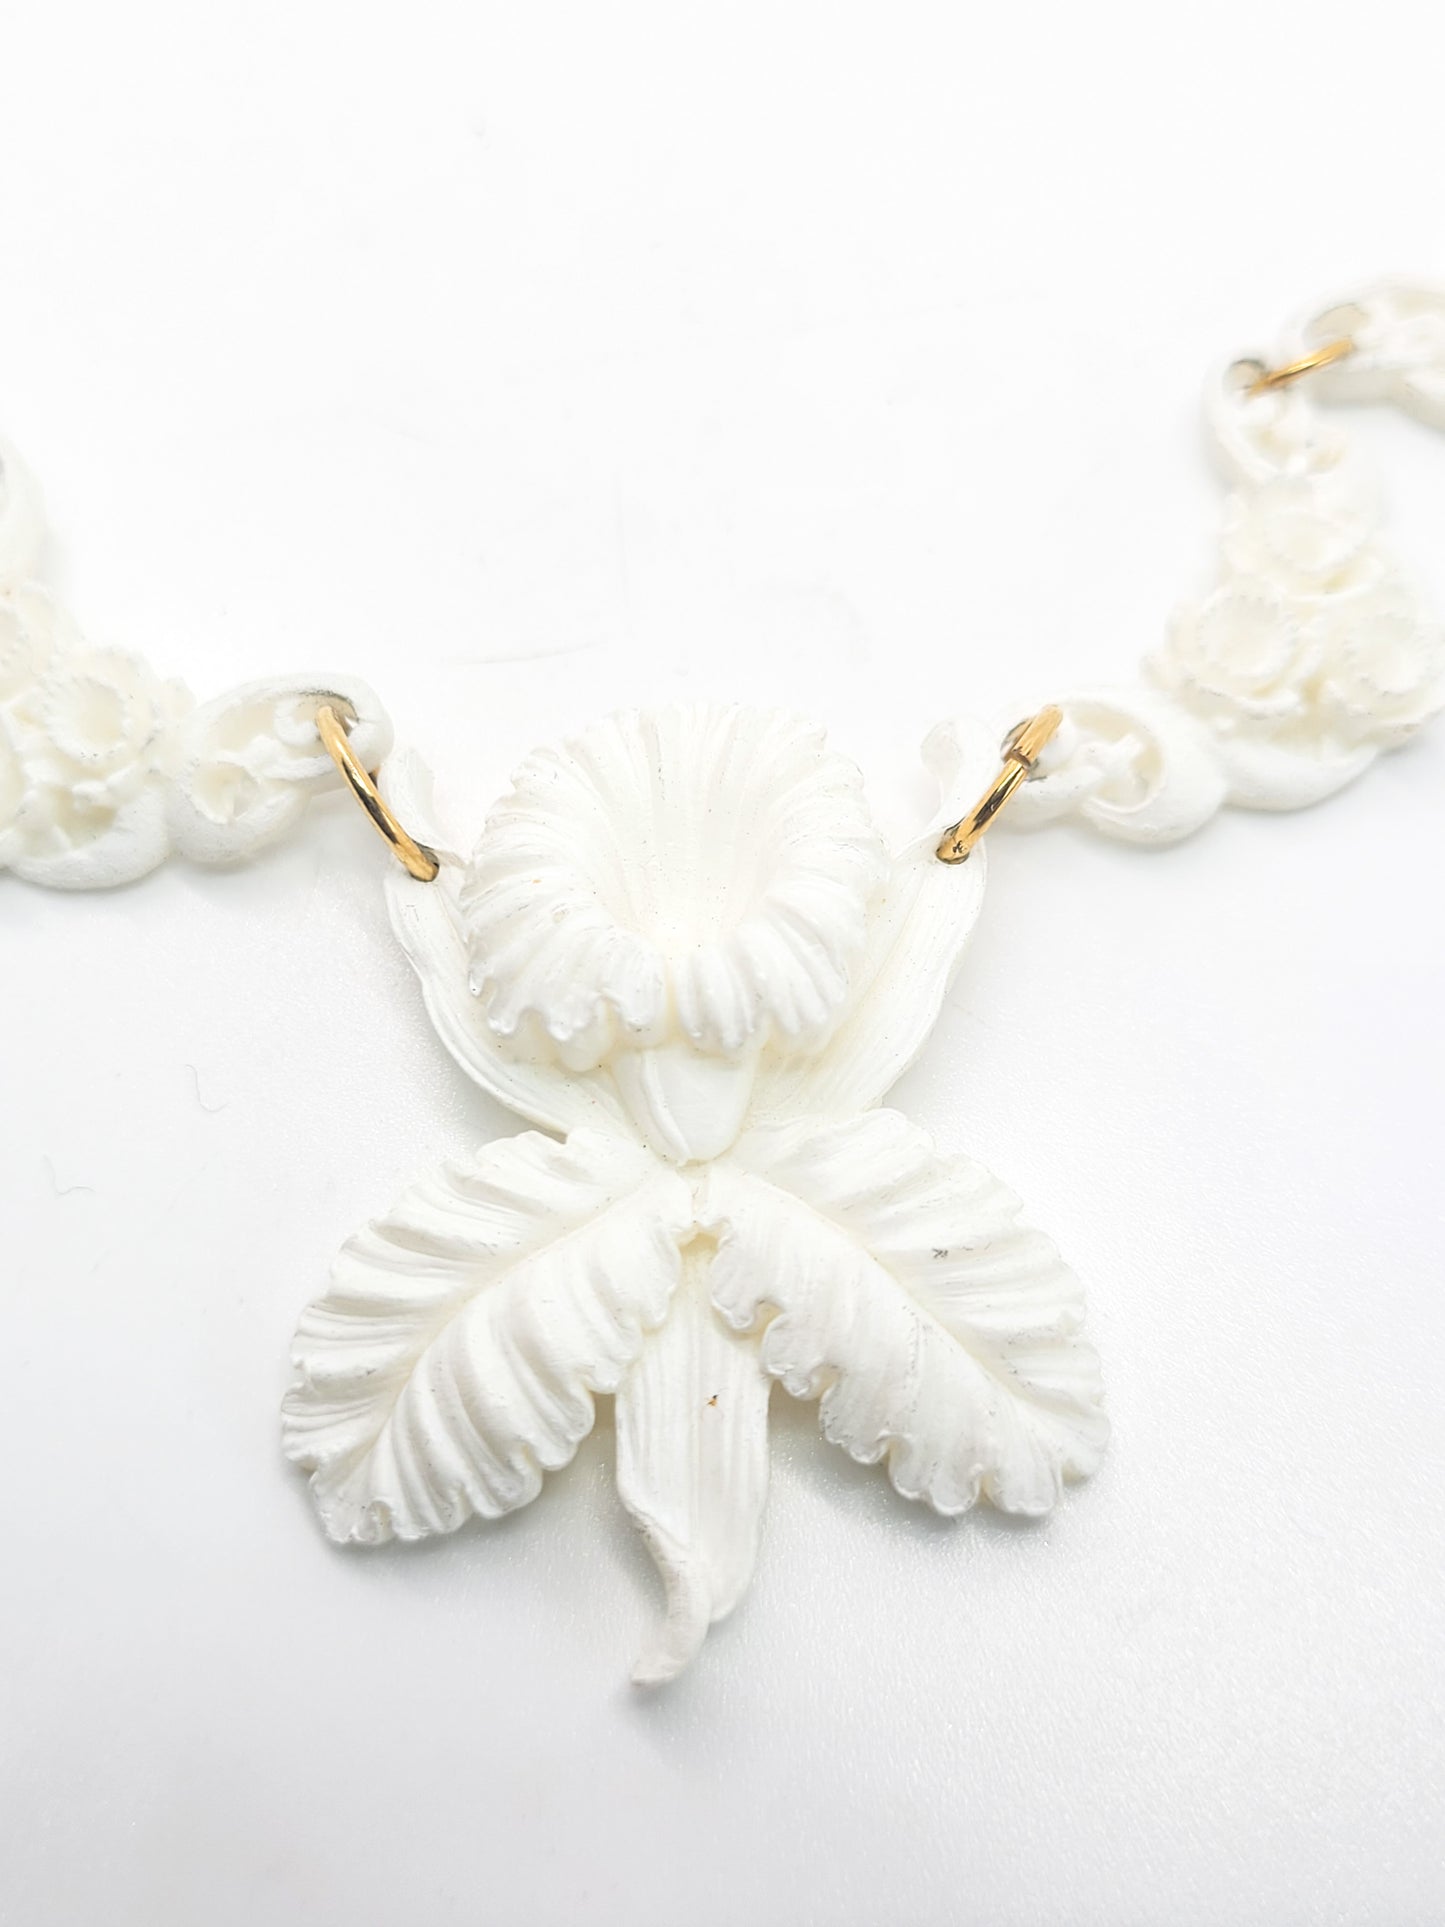 Carved Celluloid white Iris flower faux pearl bib vintage statement necklace